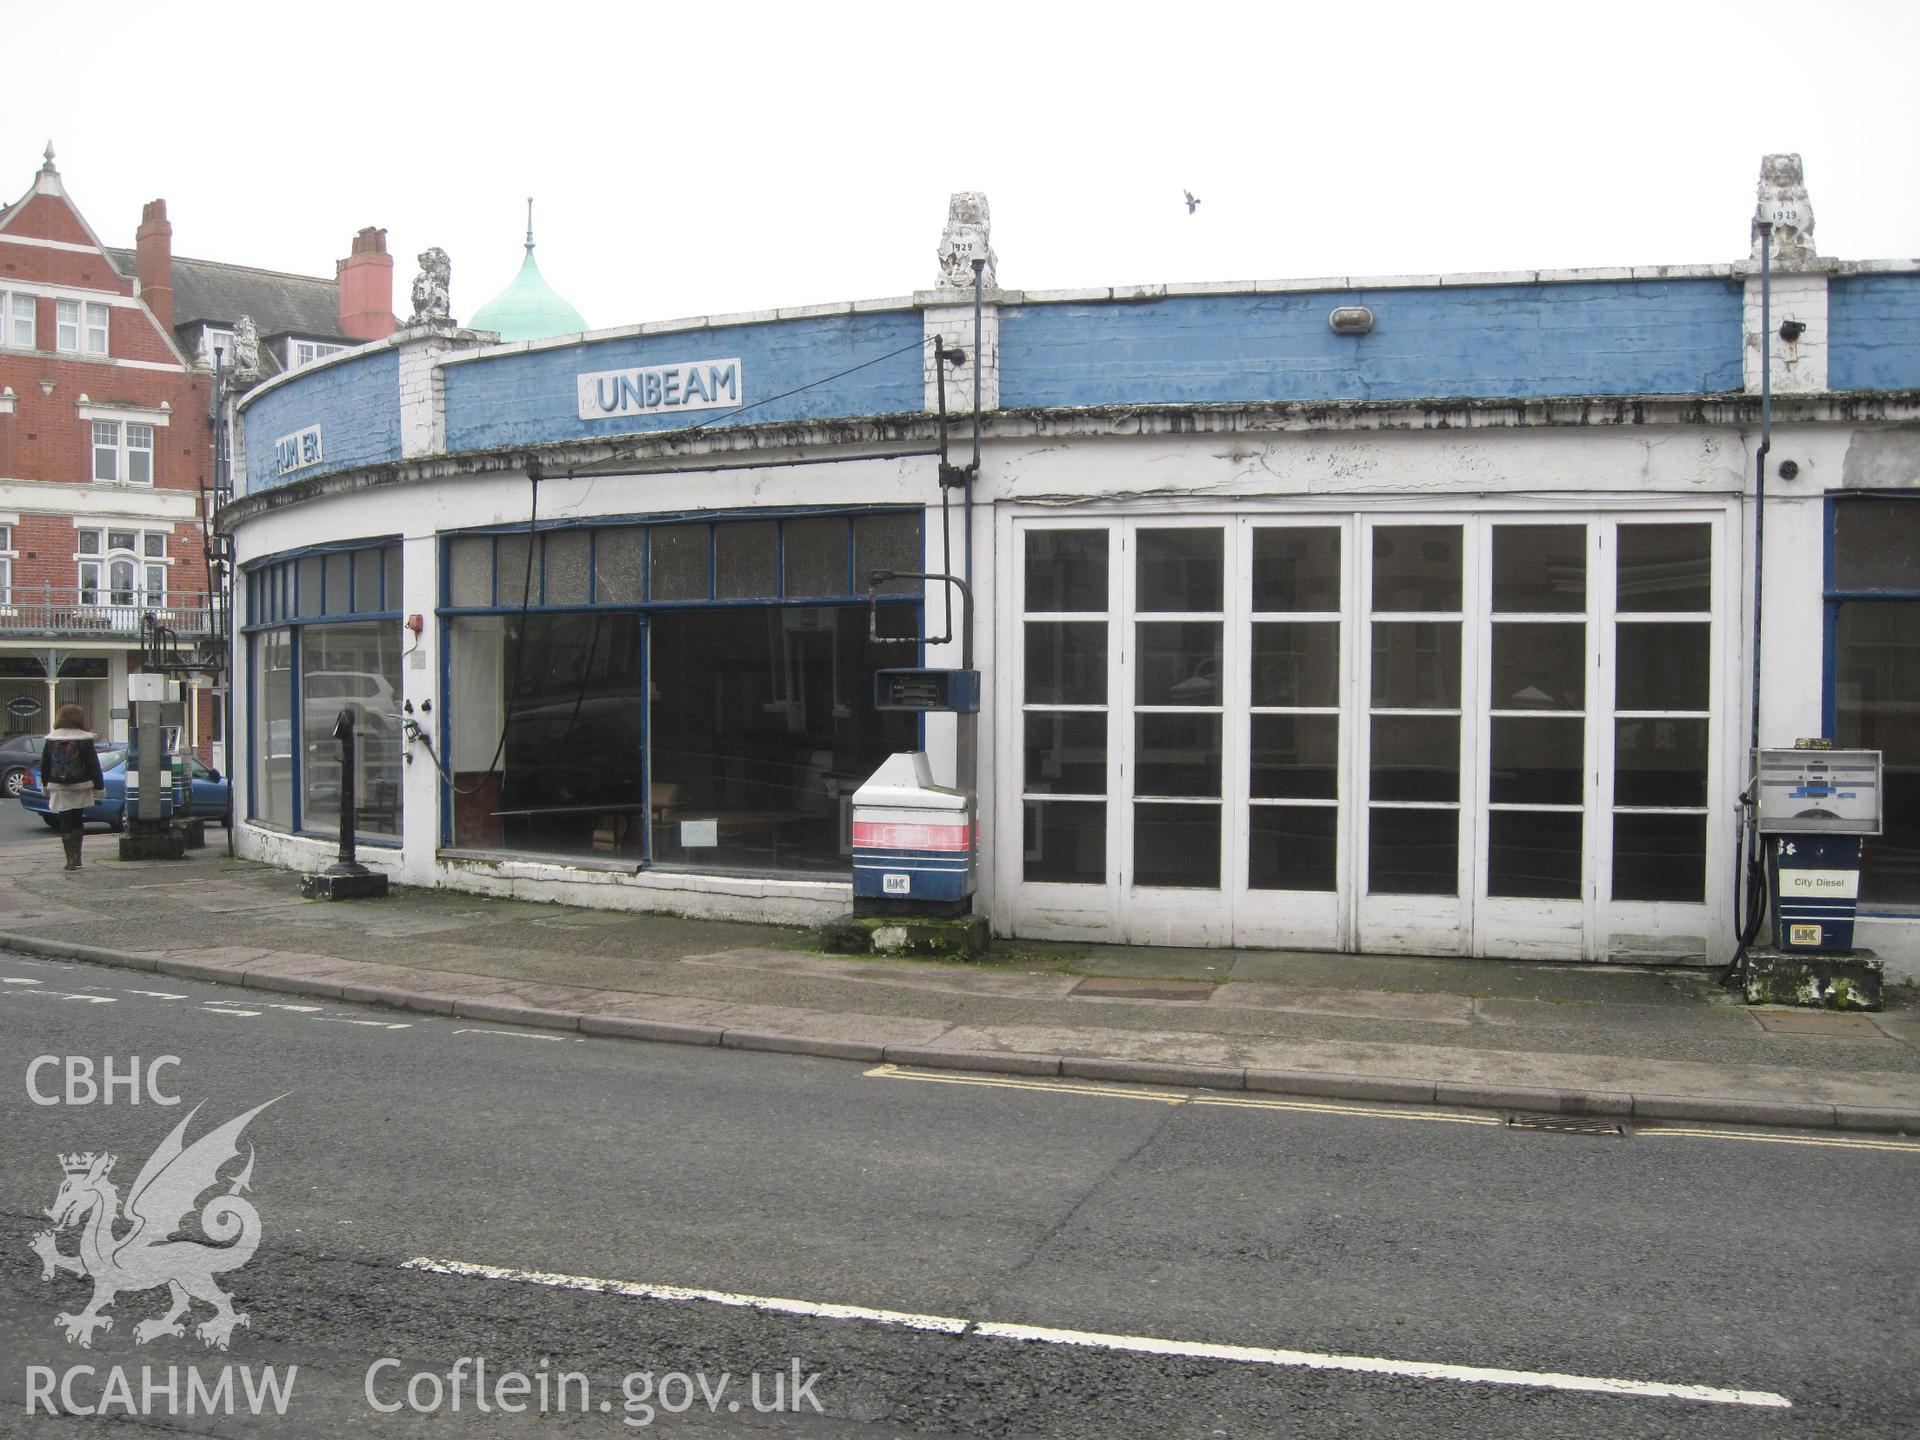 View of Pritchard's Garage, Llandrindod Wells, from the east.